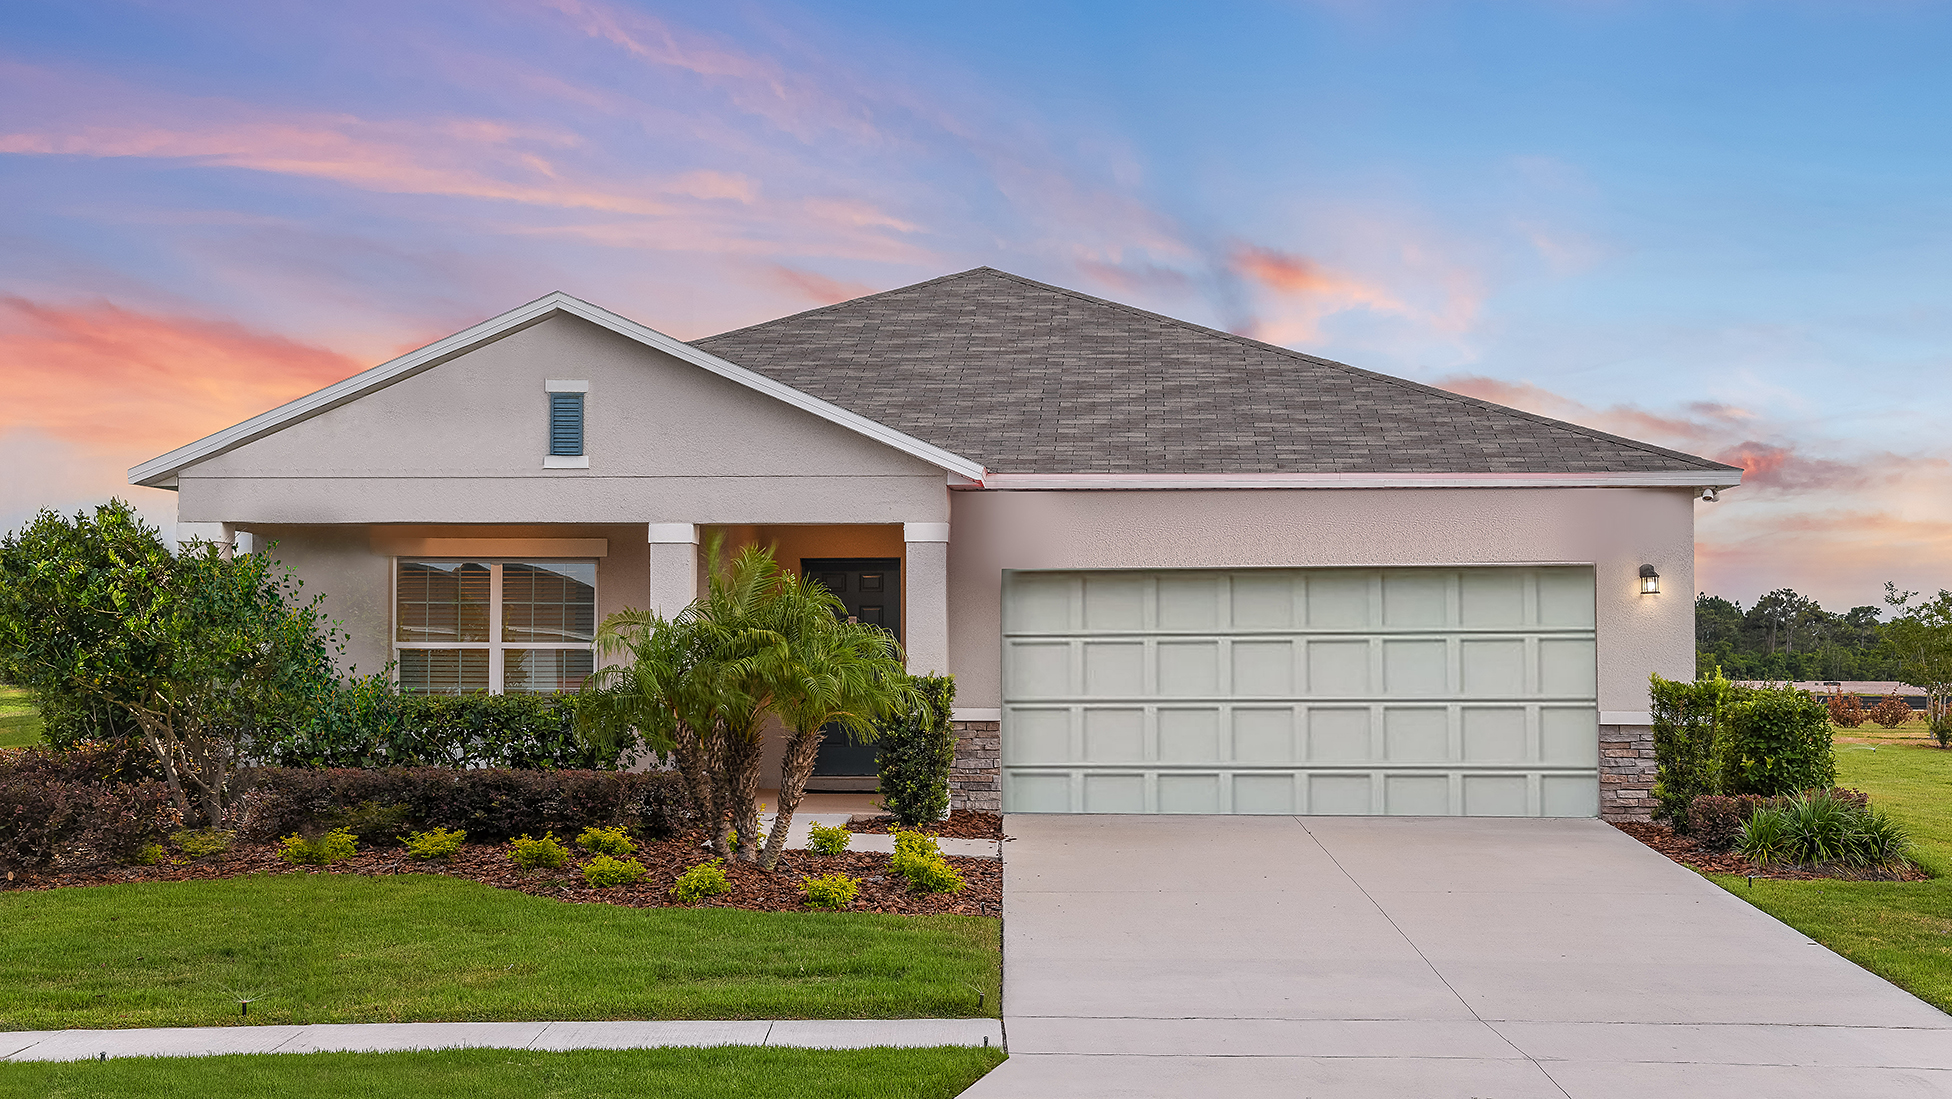 Kissimmee, Florida Homes for Sale at Stepping Stone - Taylor Morrison